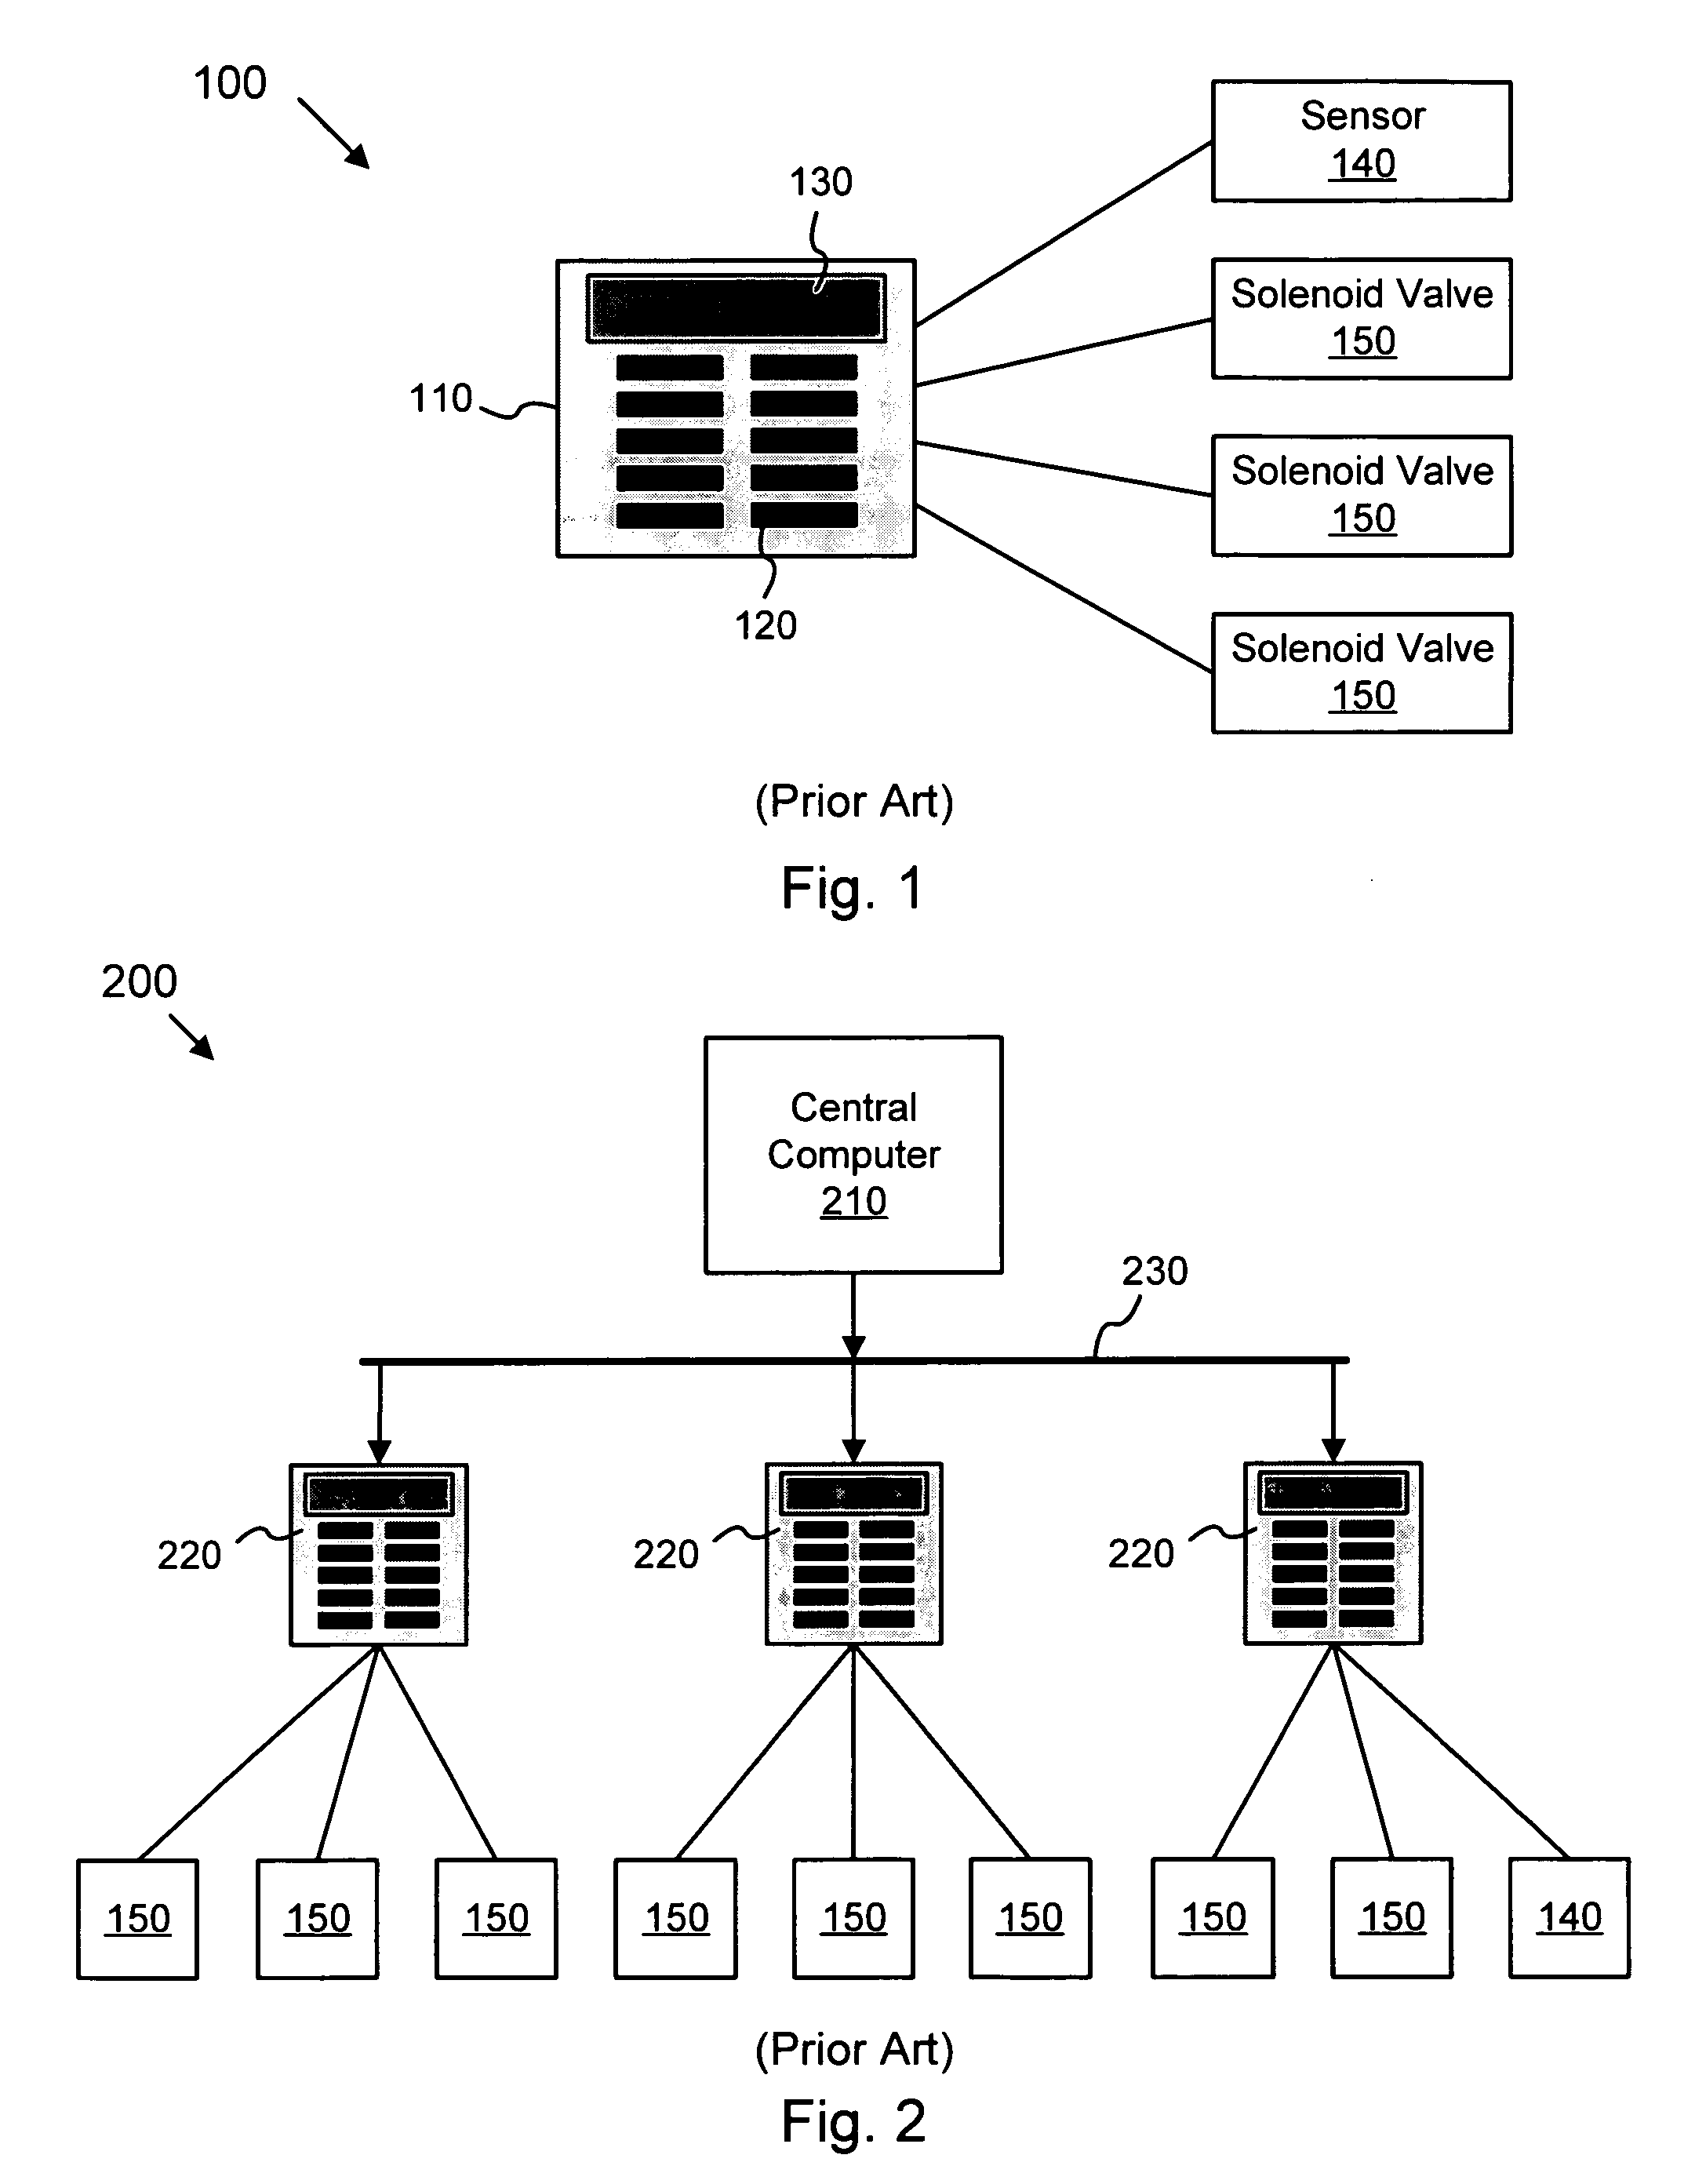 Irrigation controller with embedded web server